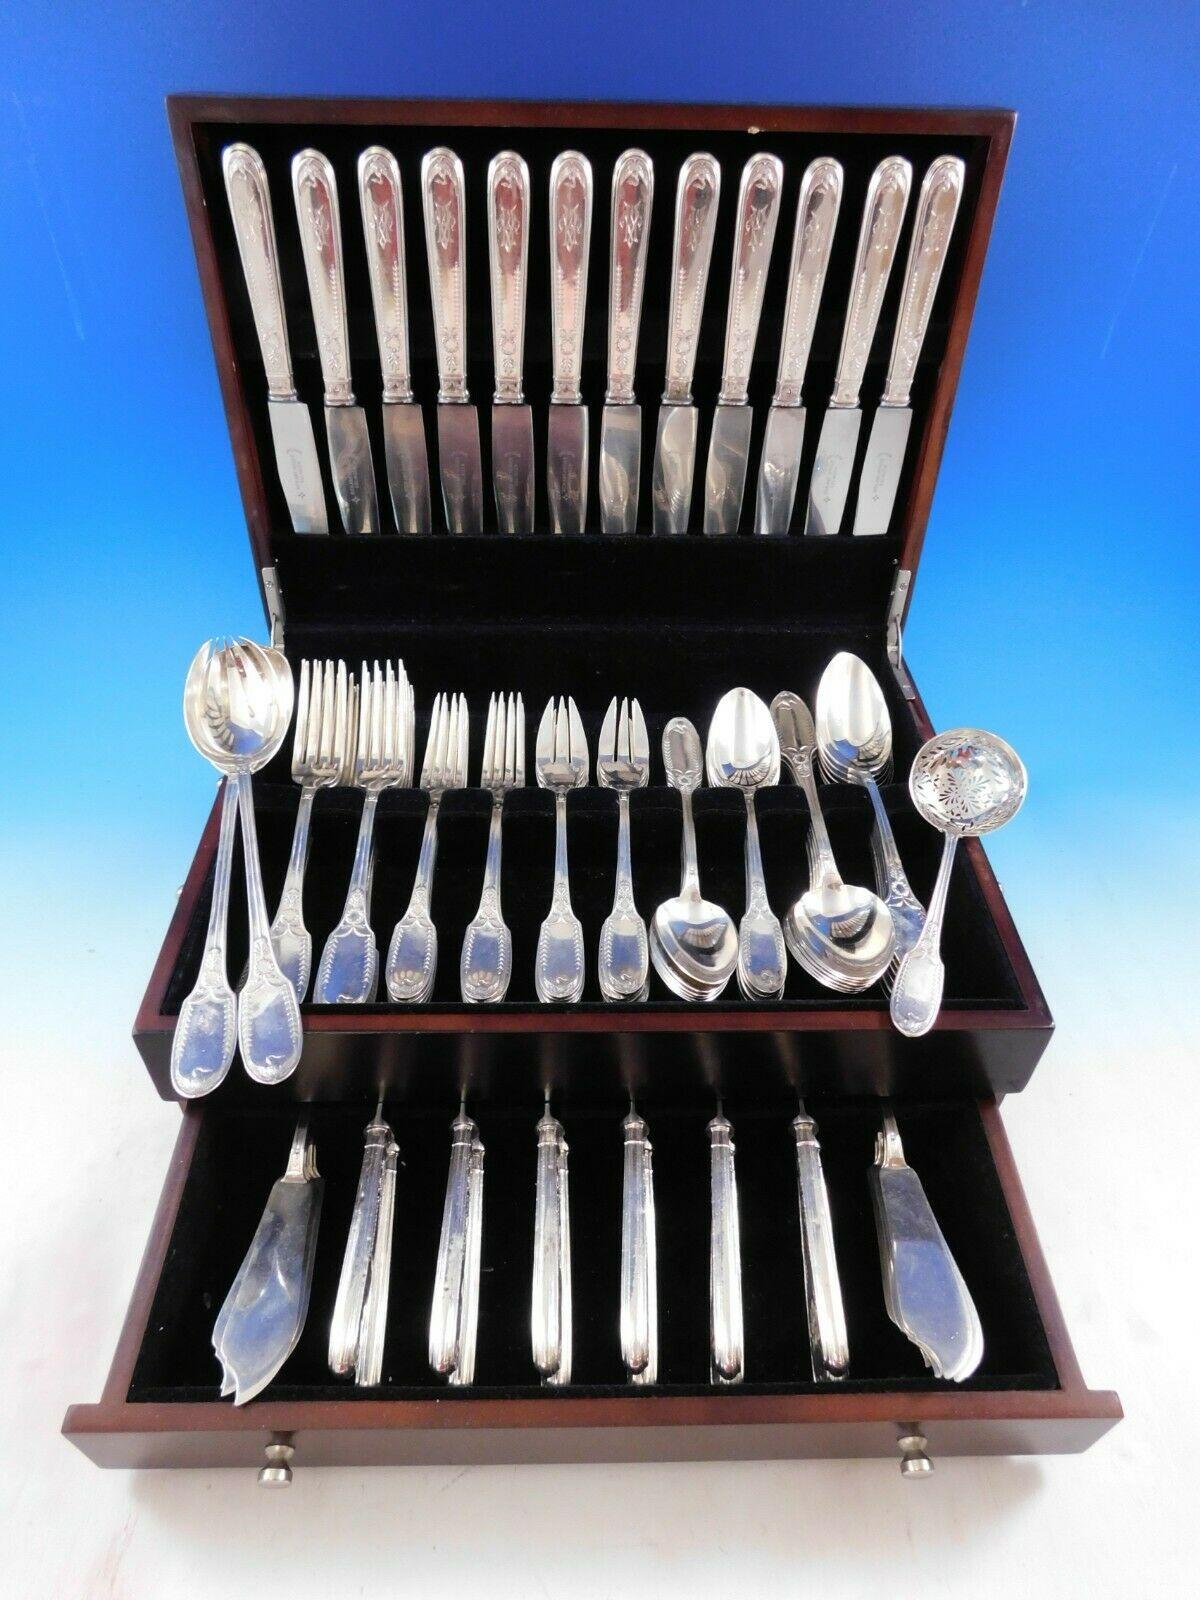 The Parisian silversmith Puiforcat is regarded as one of the legendary names in European silver craftsmanship. 
Superb Dinner Size Empire by Puiforcat sterling silver flatware set, 99 pieces. This rare pattern features an elegant swan motif. This